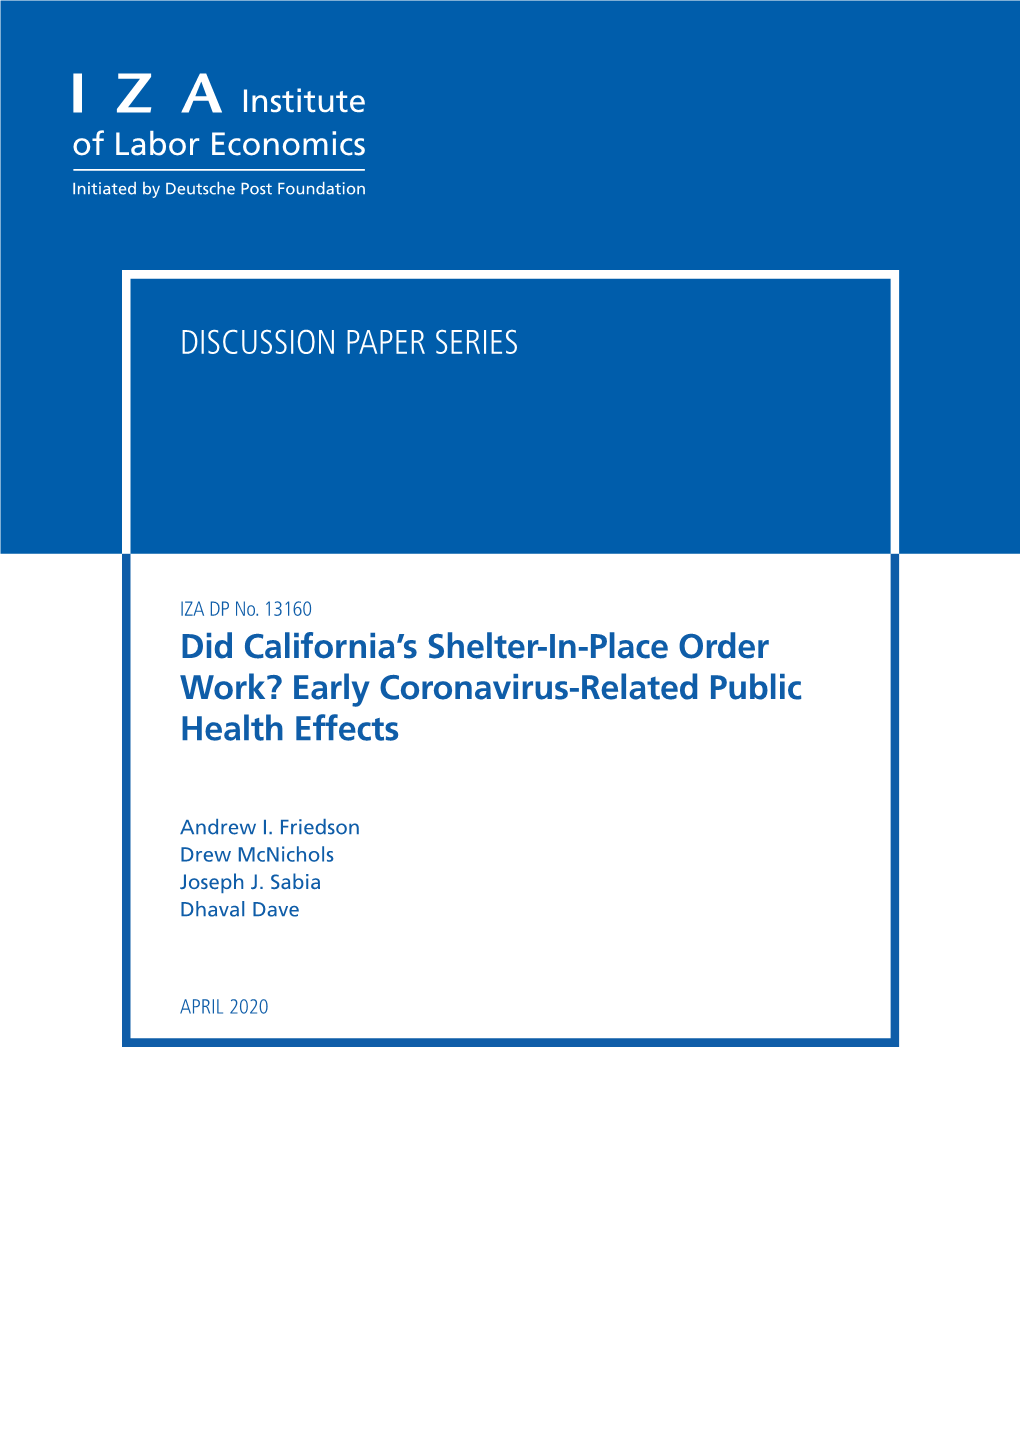 Did California's Shelter-In-Place Order Work? Early Coronavirus-Related Public Health Effects